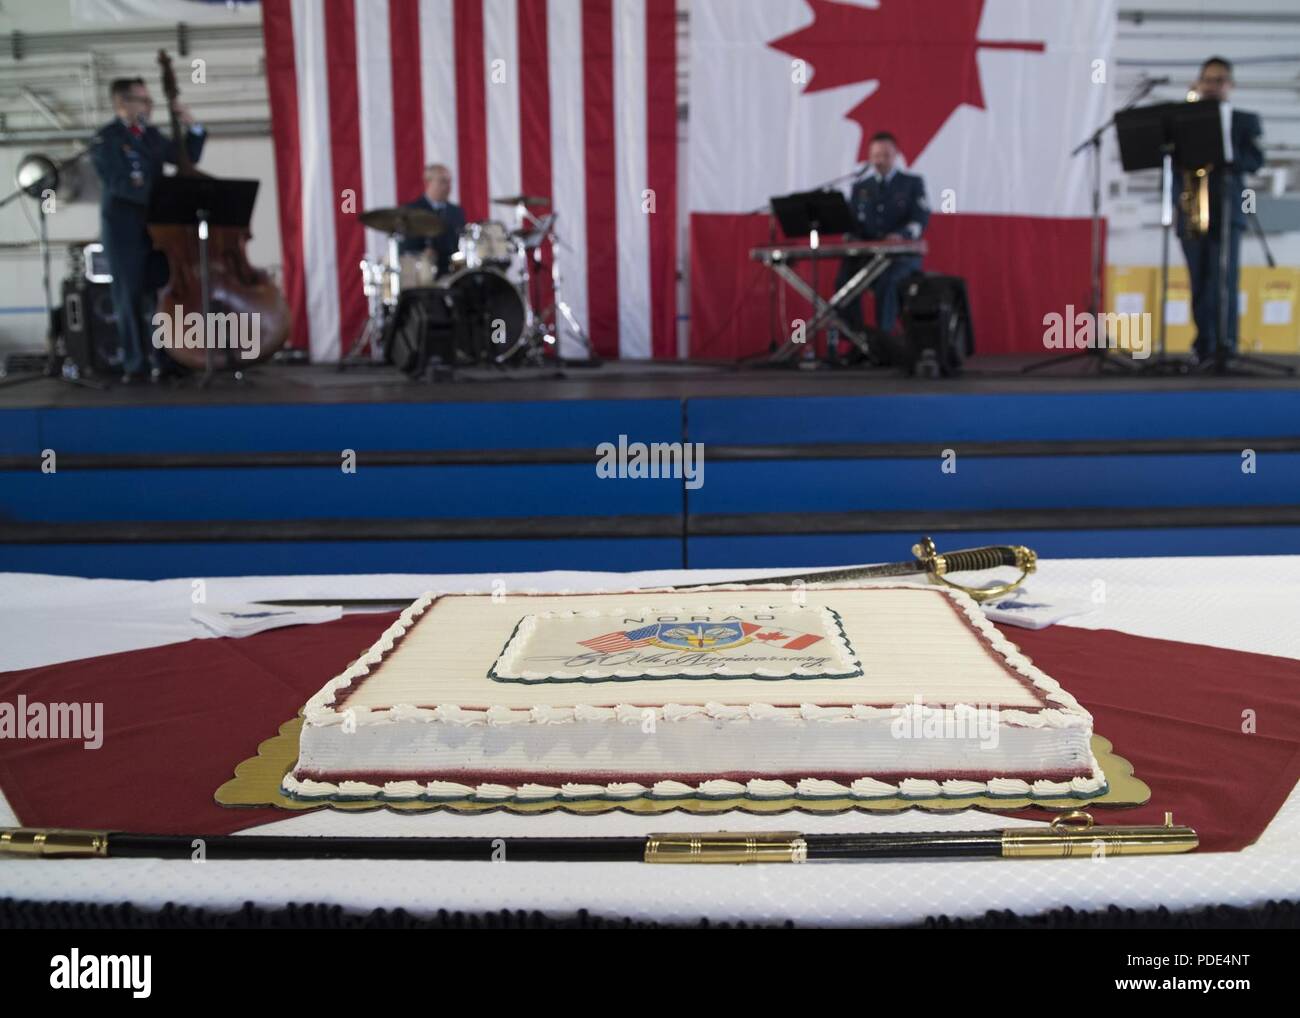 A celebratory cake is displayed during the North American Aerospace Defense Command's 60th Anniversary Ceremony on Peterson Air Force Base Colorado, May 12, 2018. The ceremony and static display of various NORAD aircraft was the culmination of a three-day event, which included a media tour of Cheyenne Mountain Air Force Station, the dedication of a cairn outside the commands' headquarters building memorializing the Canadians who have passed away while serving NORAD, and a fly over in missing-man formation performed by the Royal Canadian Air Force's Snowbirds aerial demonstration team. Stock Photo